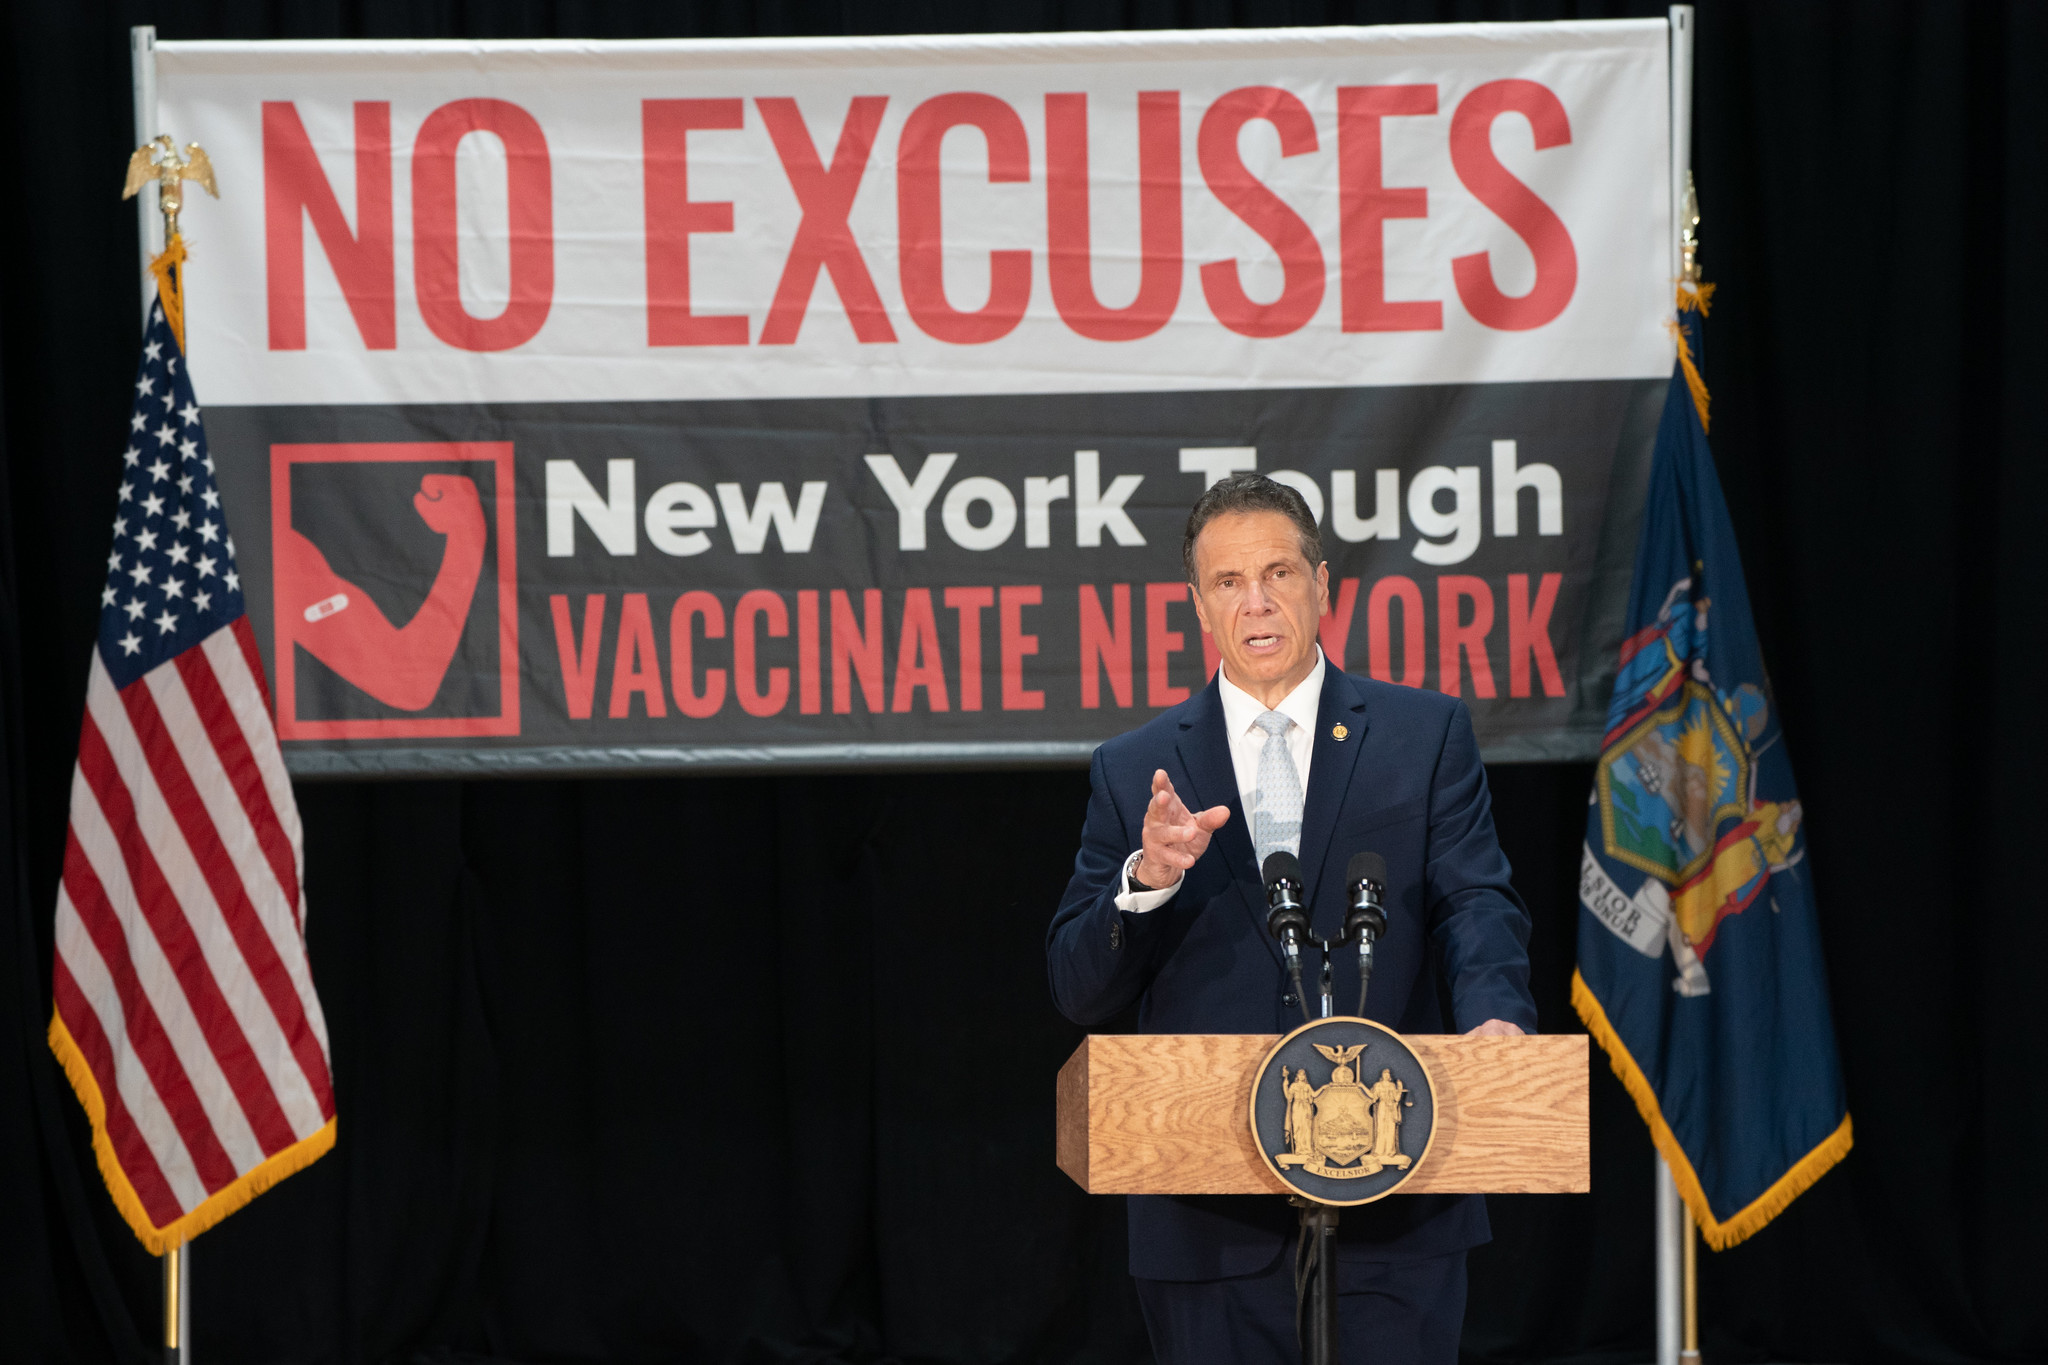 Cuomo: Western New York has not taken COVID-19 seriously enough